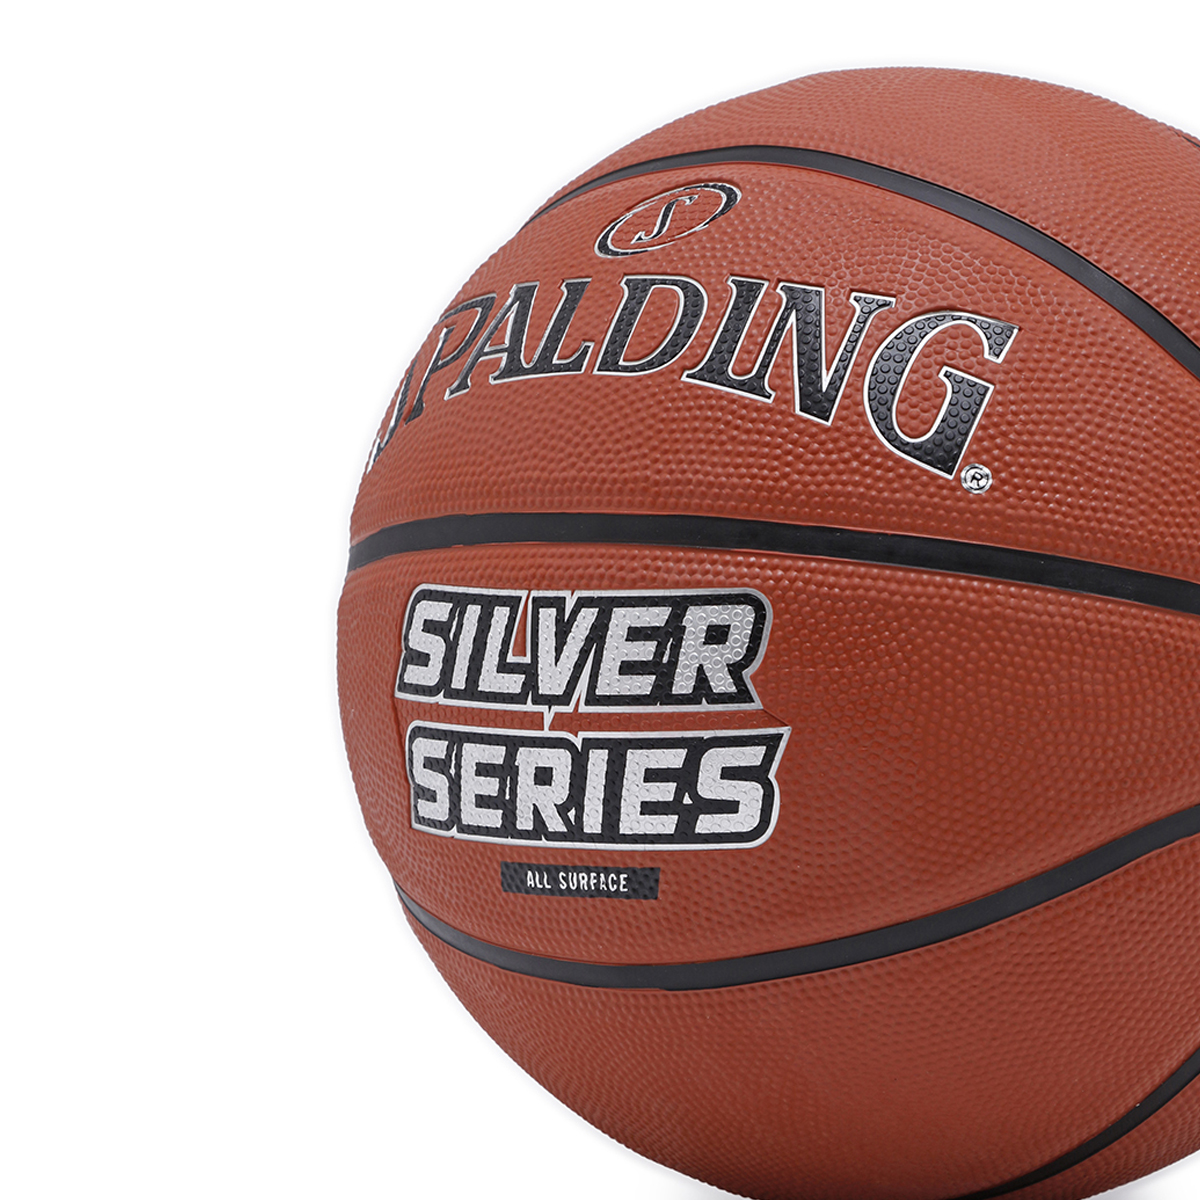 Pelota Basquet Spalding Silver Series Rubber,  image number null